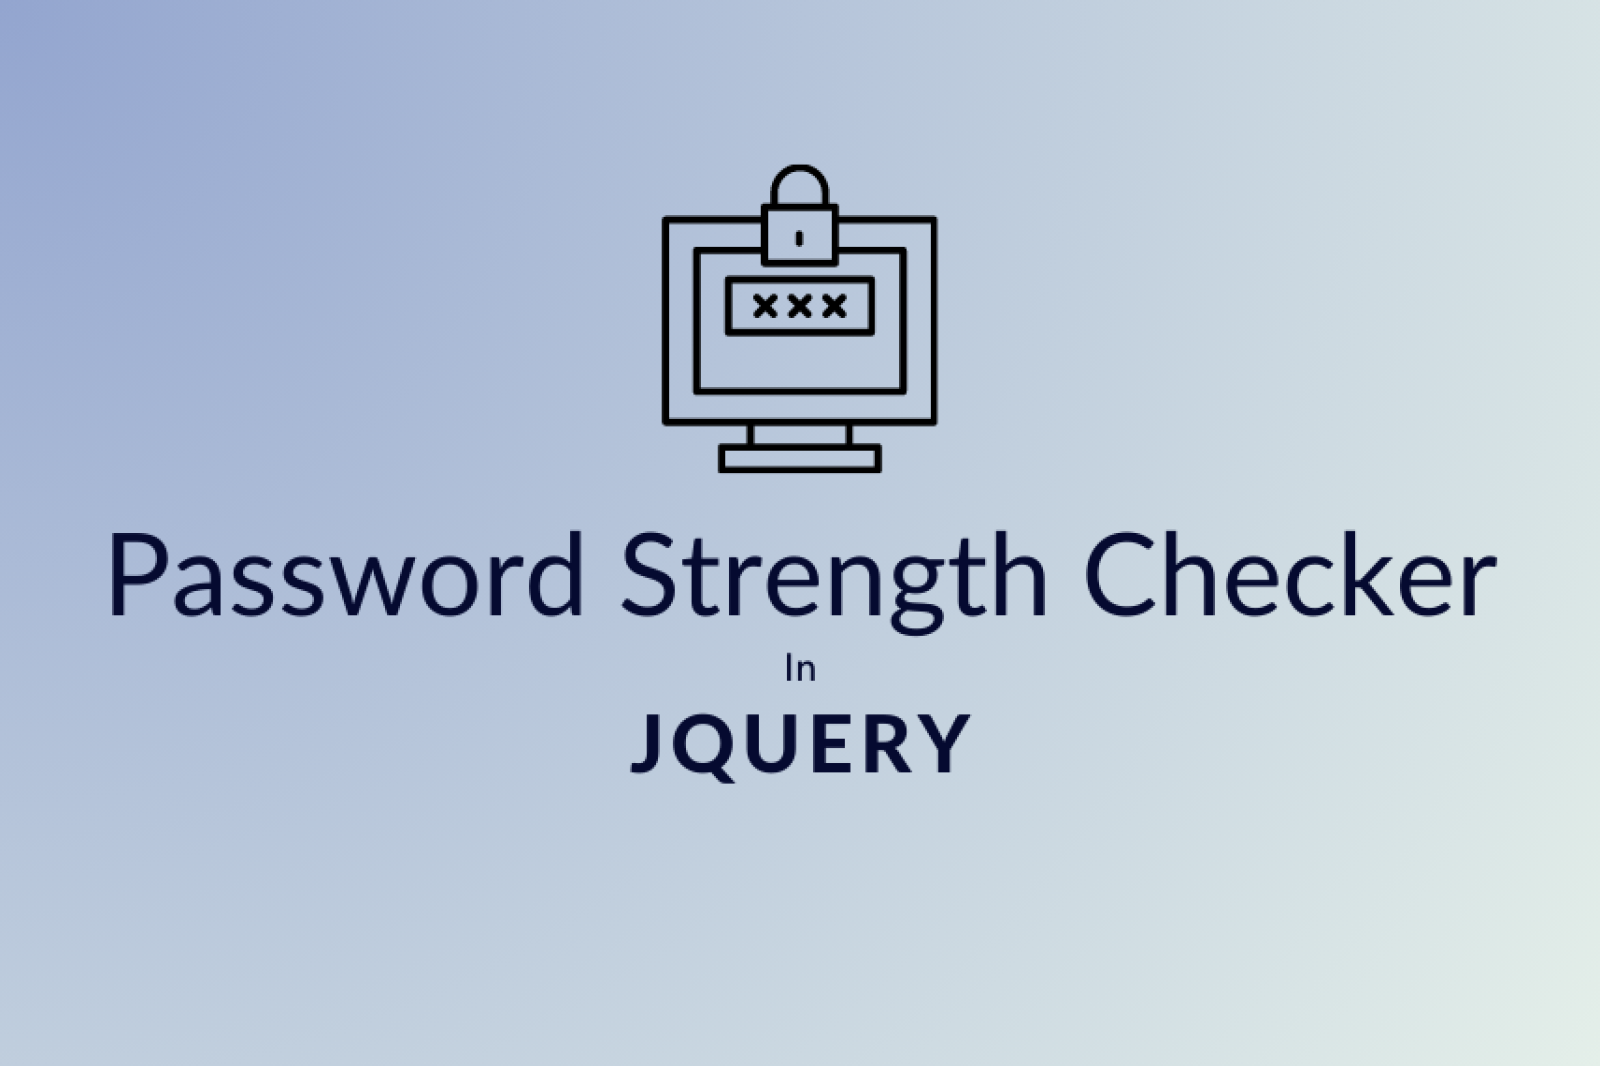 Enhance Account Security with a Password Strength Checker using jQuery